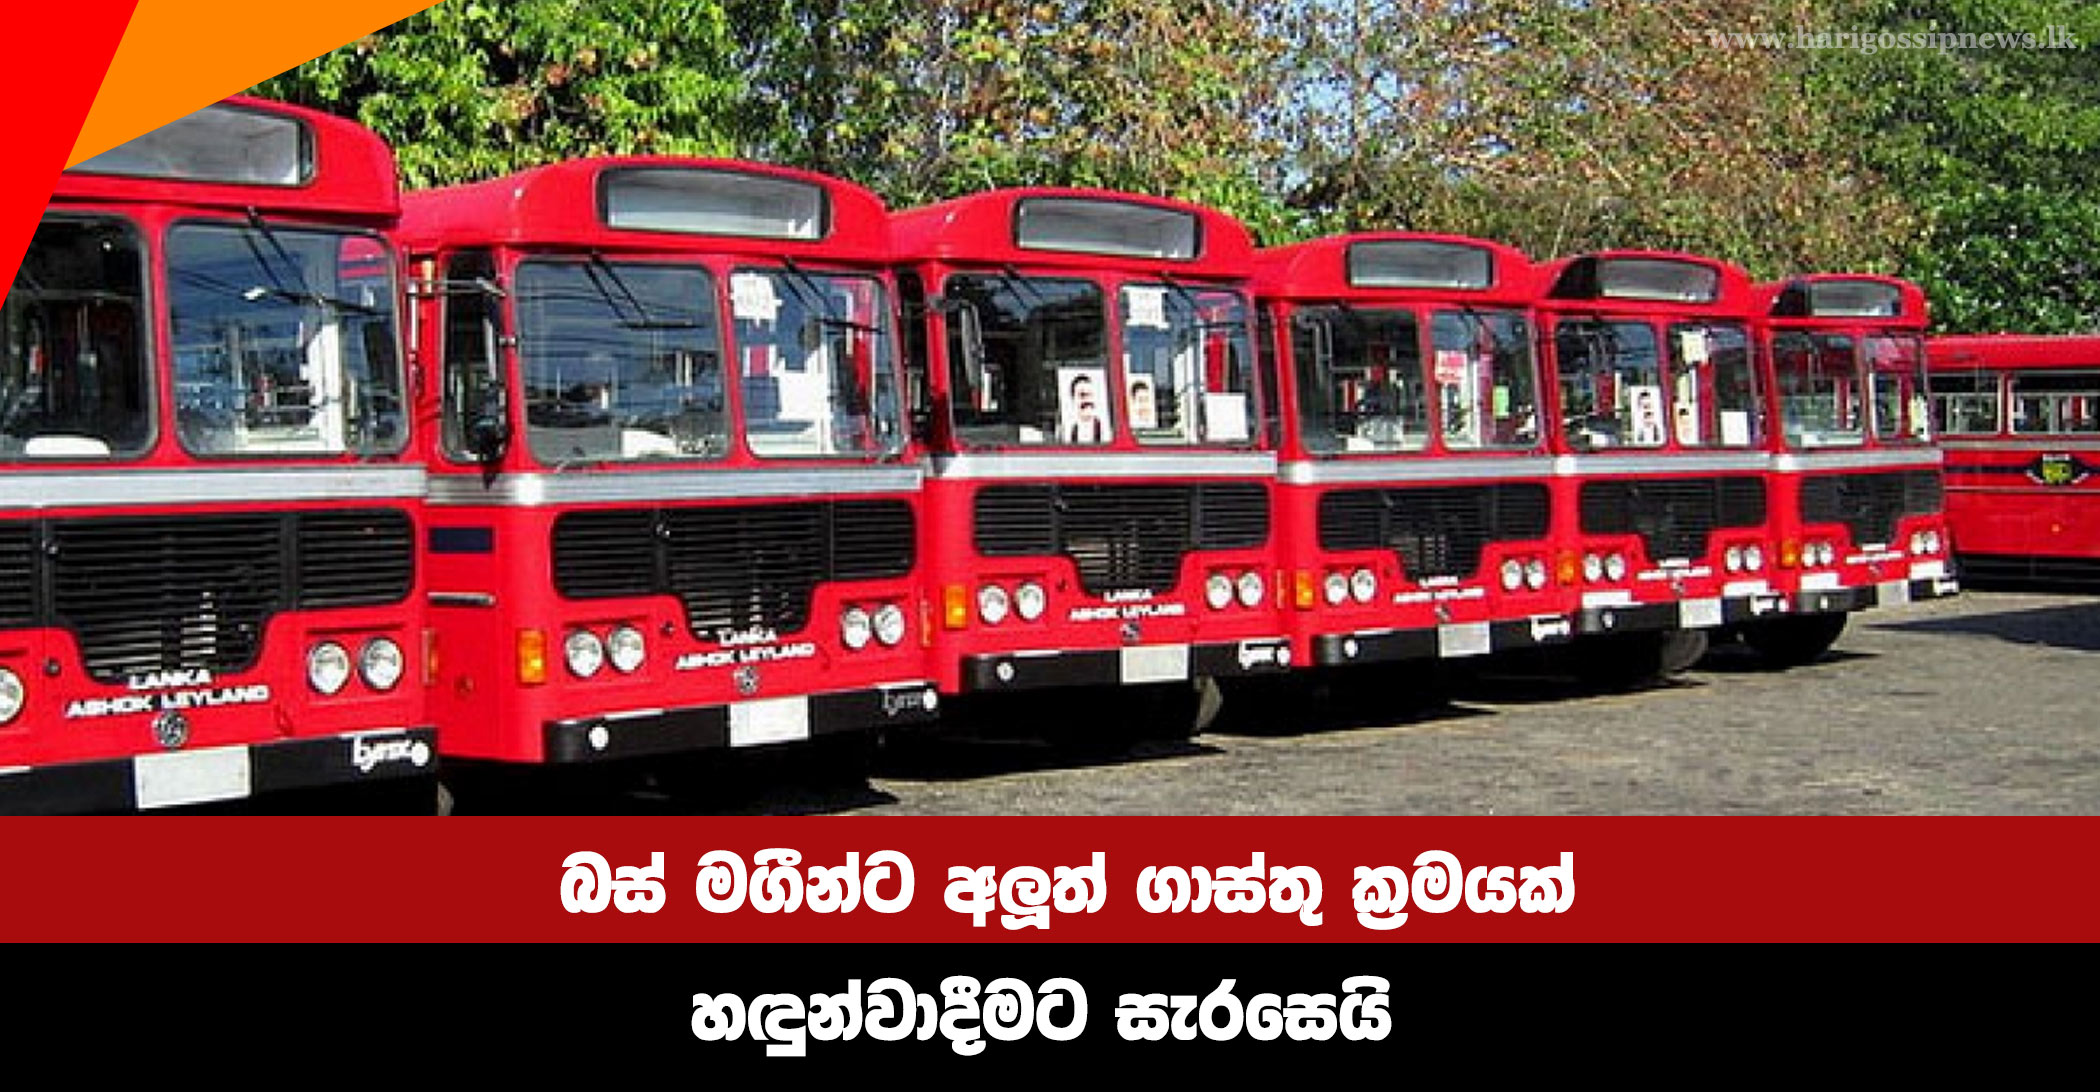 A new fare scheme is being introduced for bus passengers